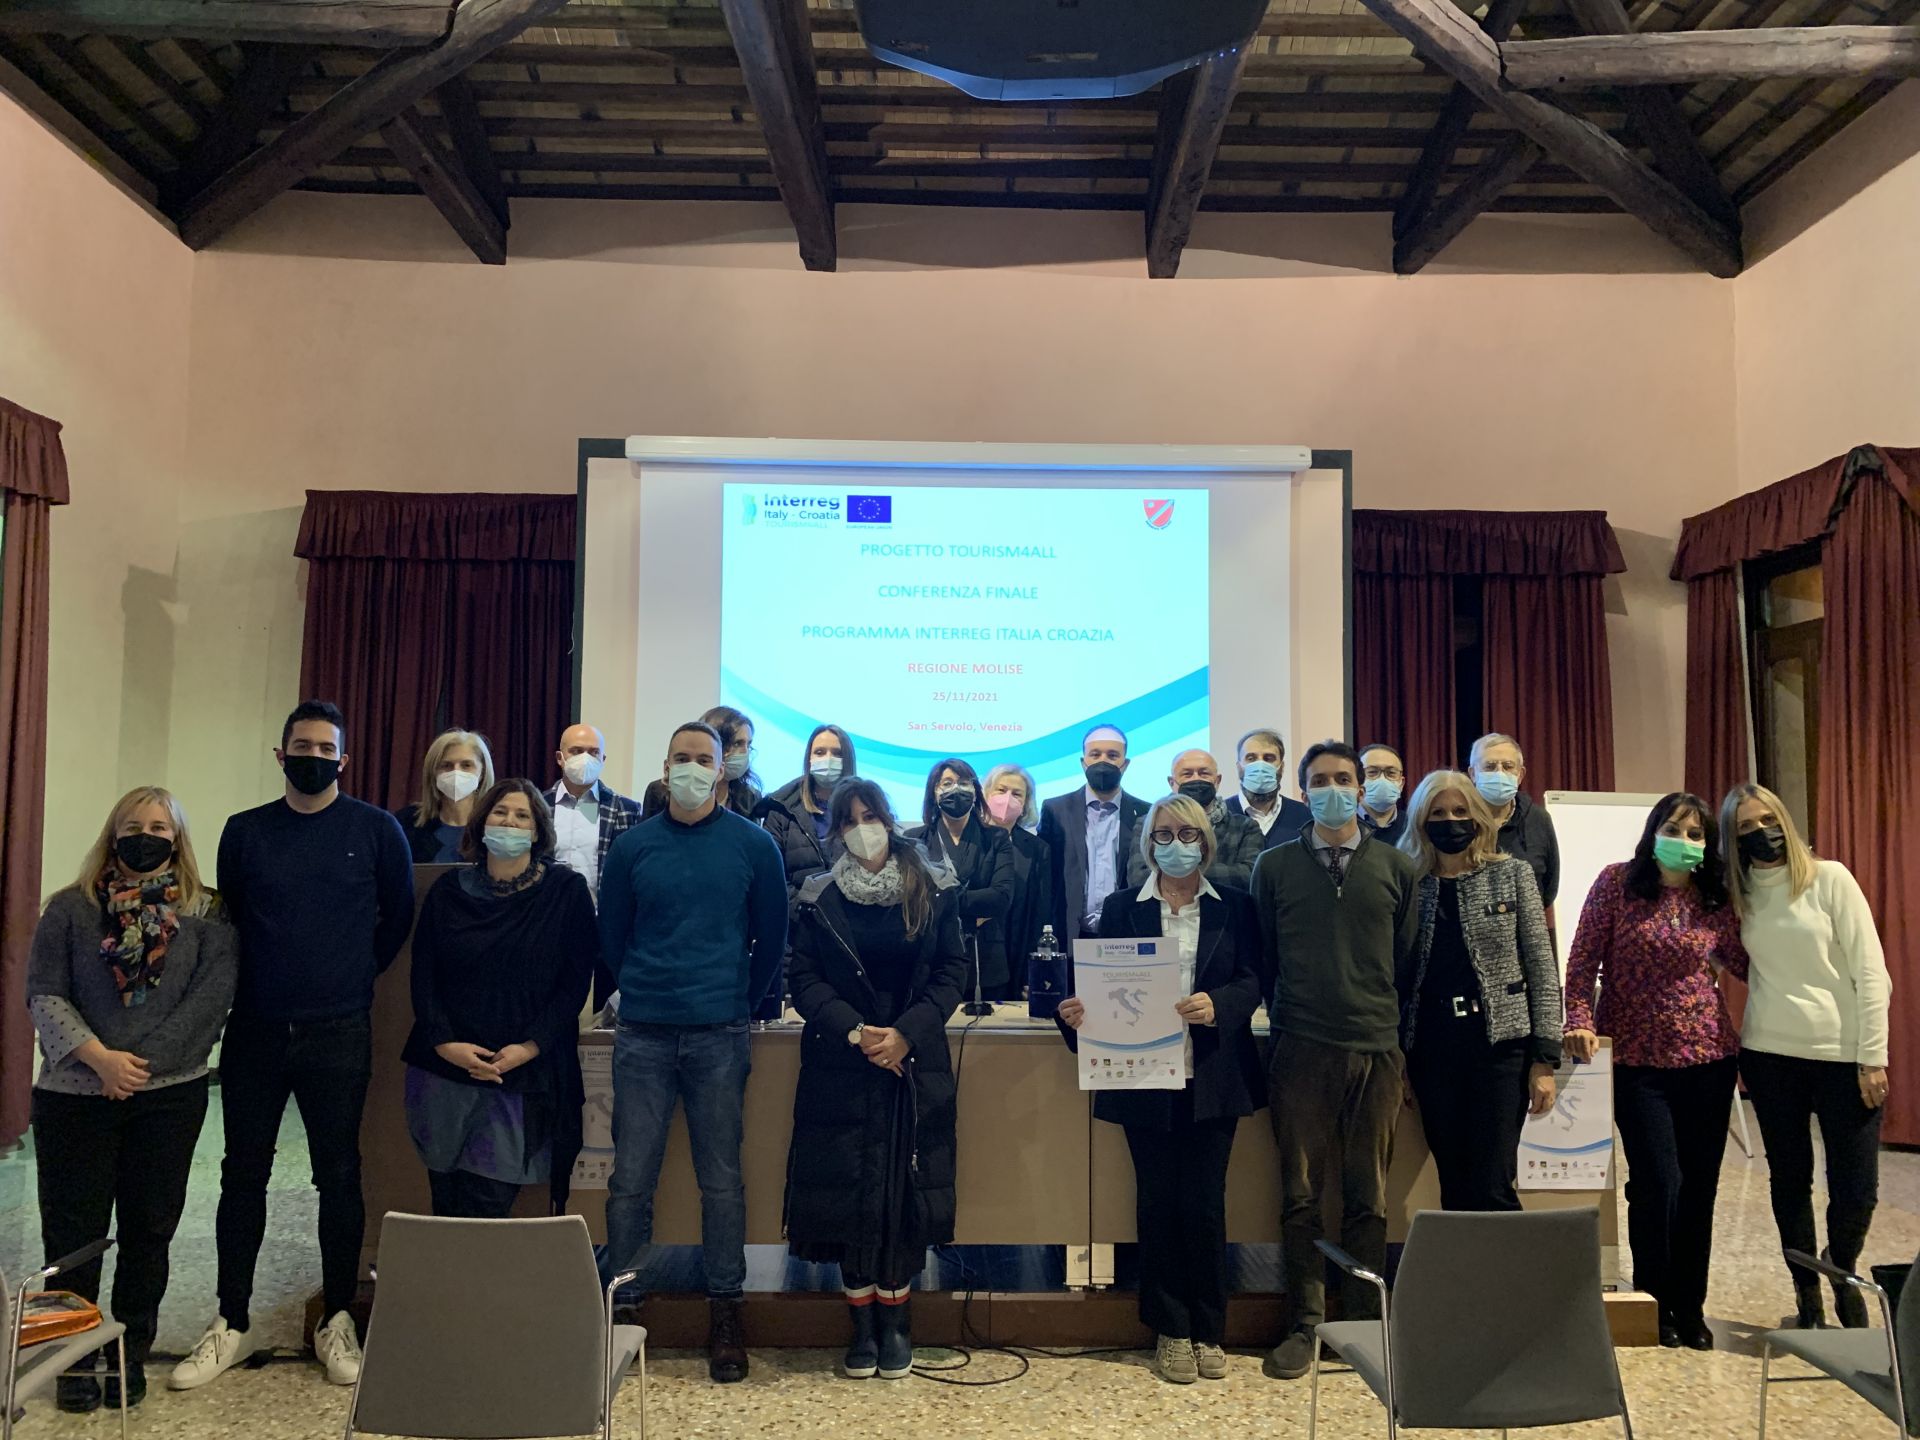 The final conference of the Tourism4all project was held in Venice on November 25, 2021